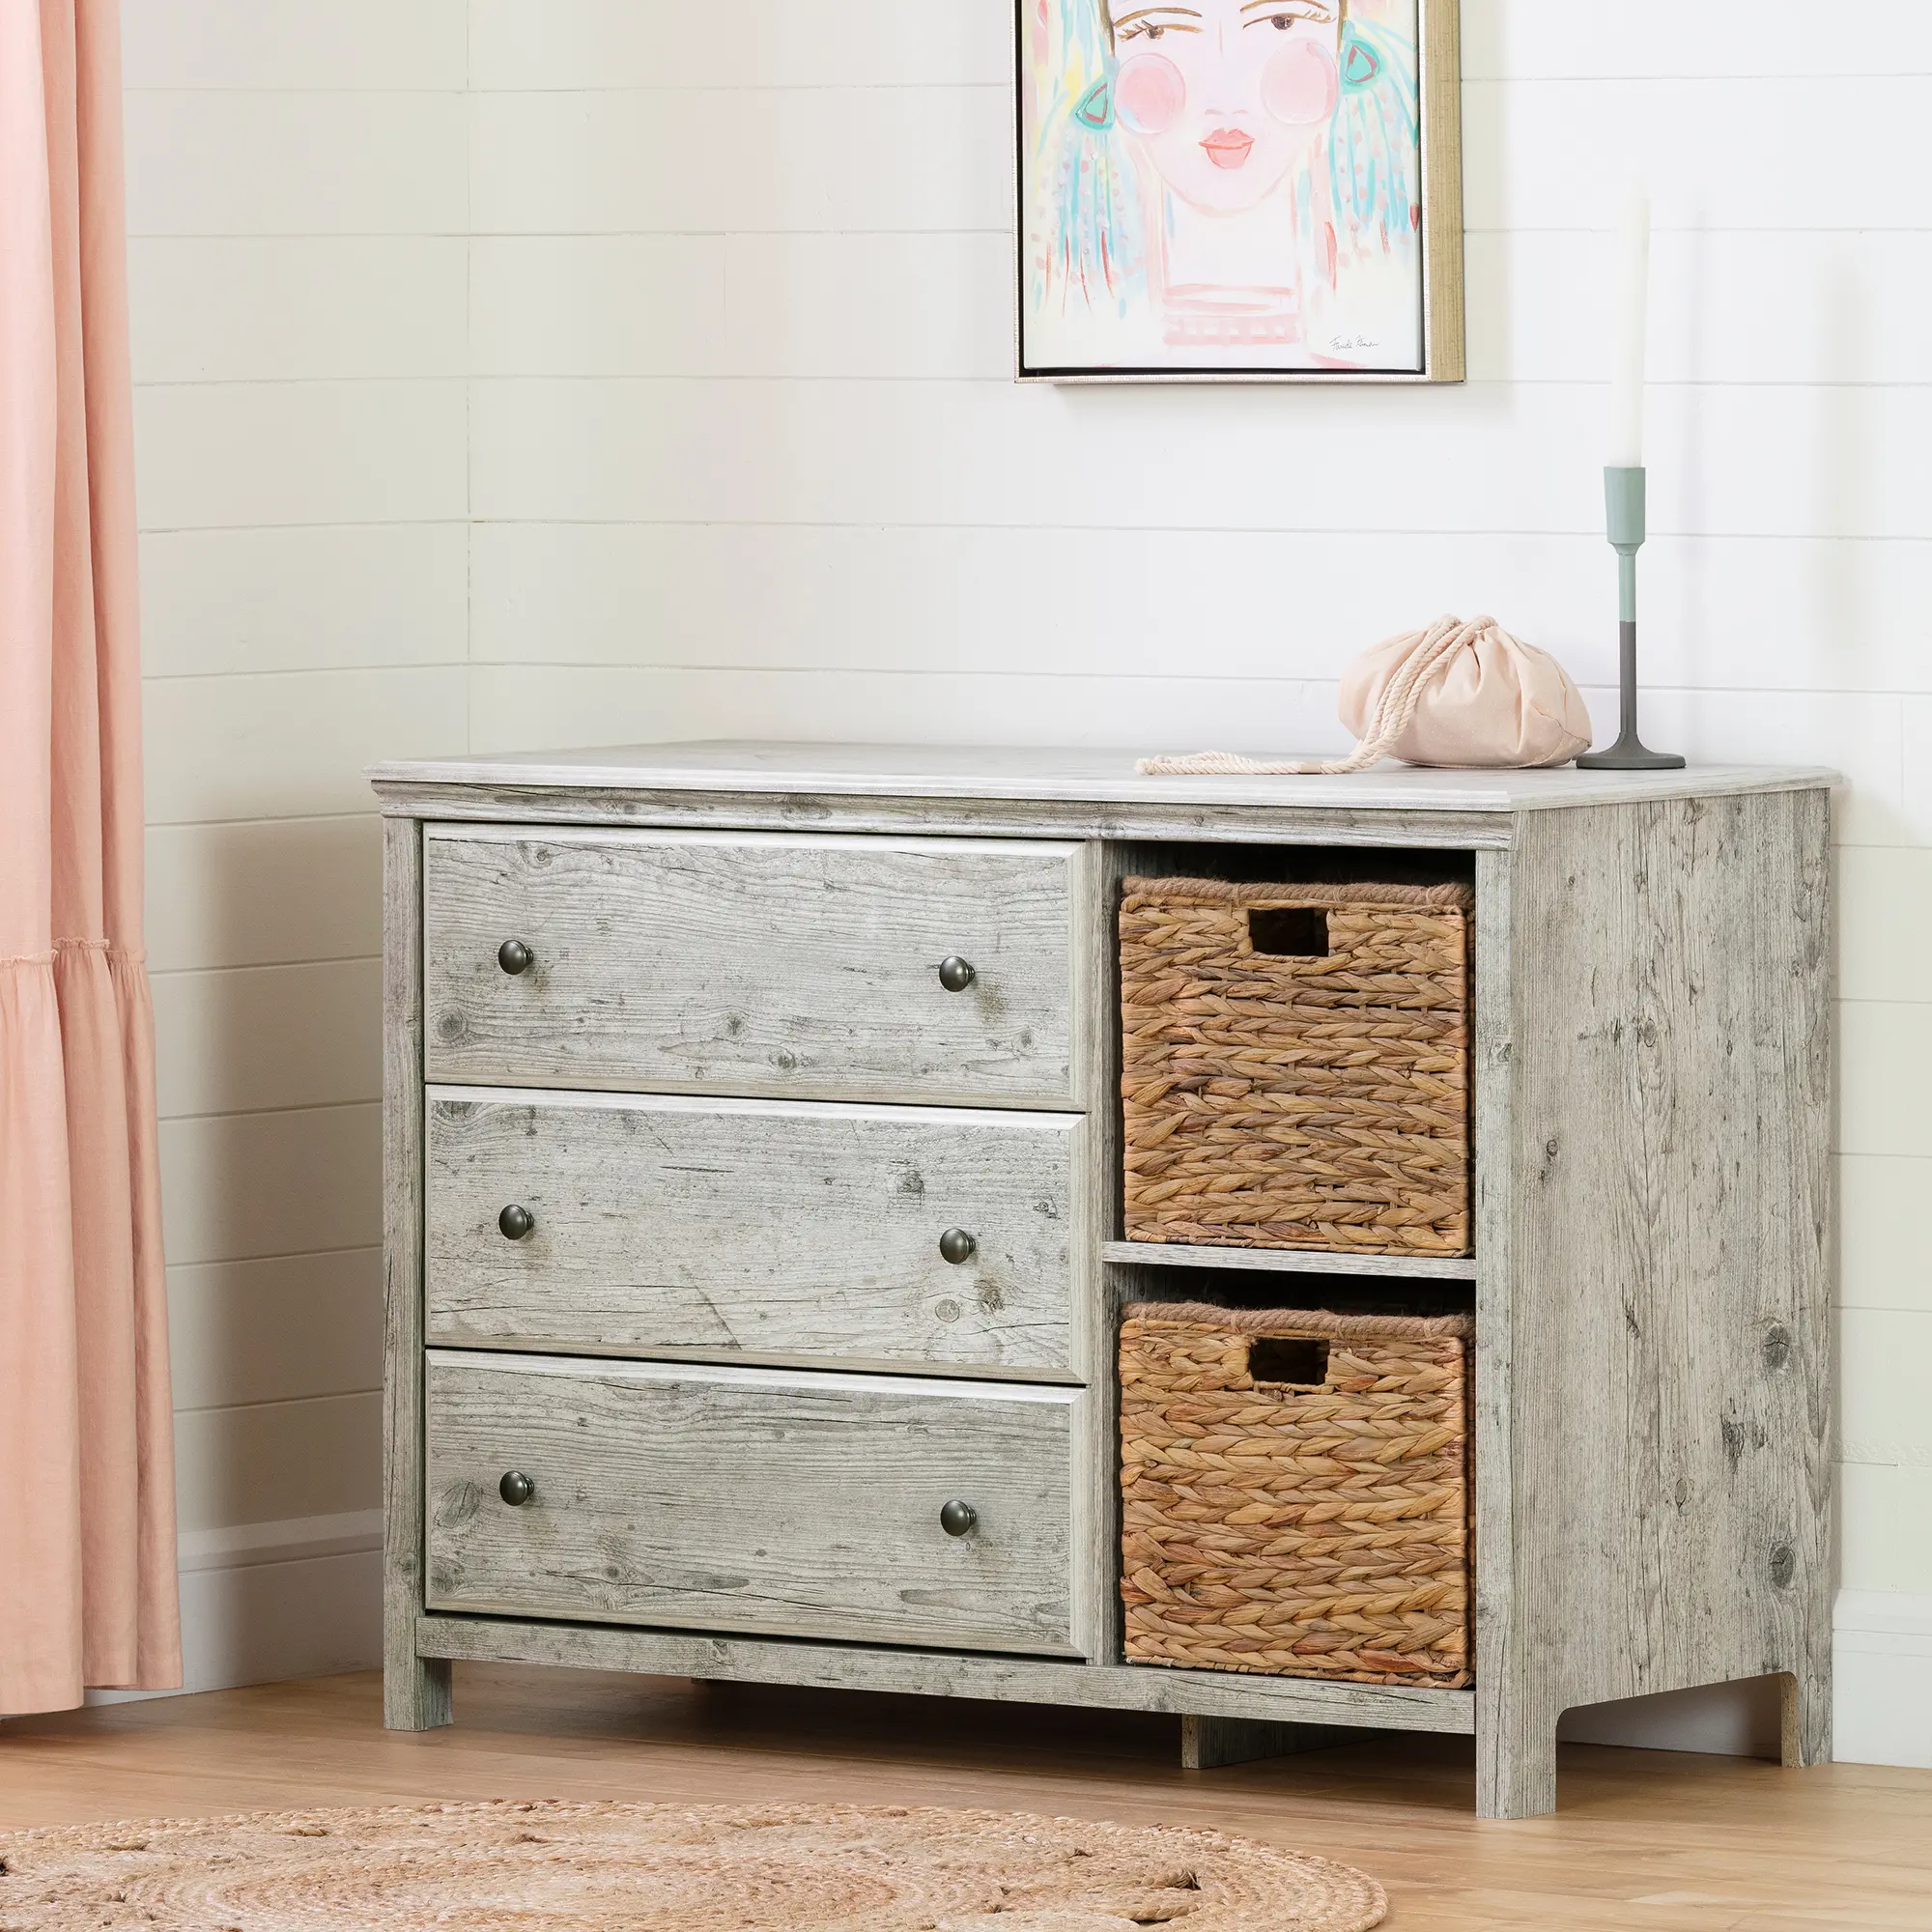 Cotton Candy Pine 3 Drawer Dresser with Baskets - South Shore